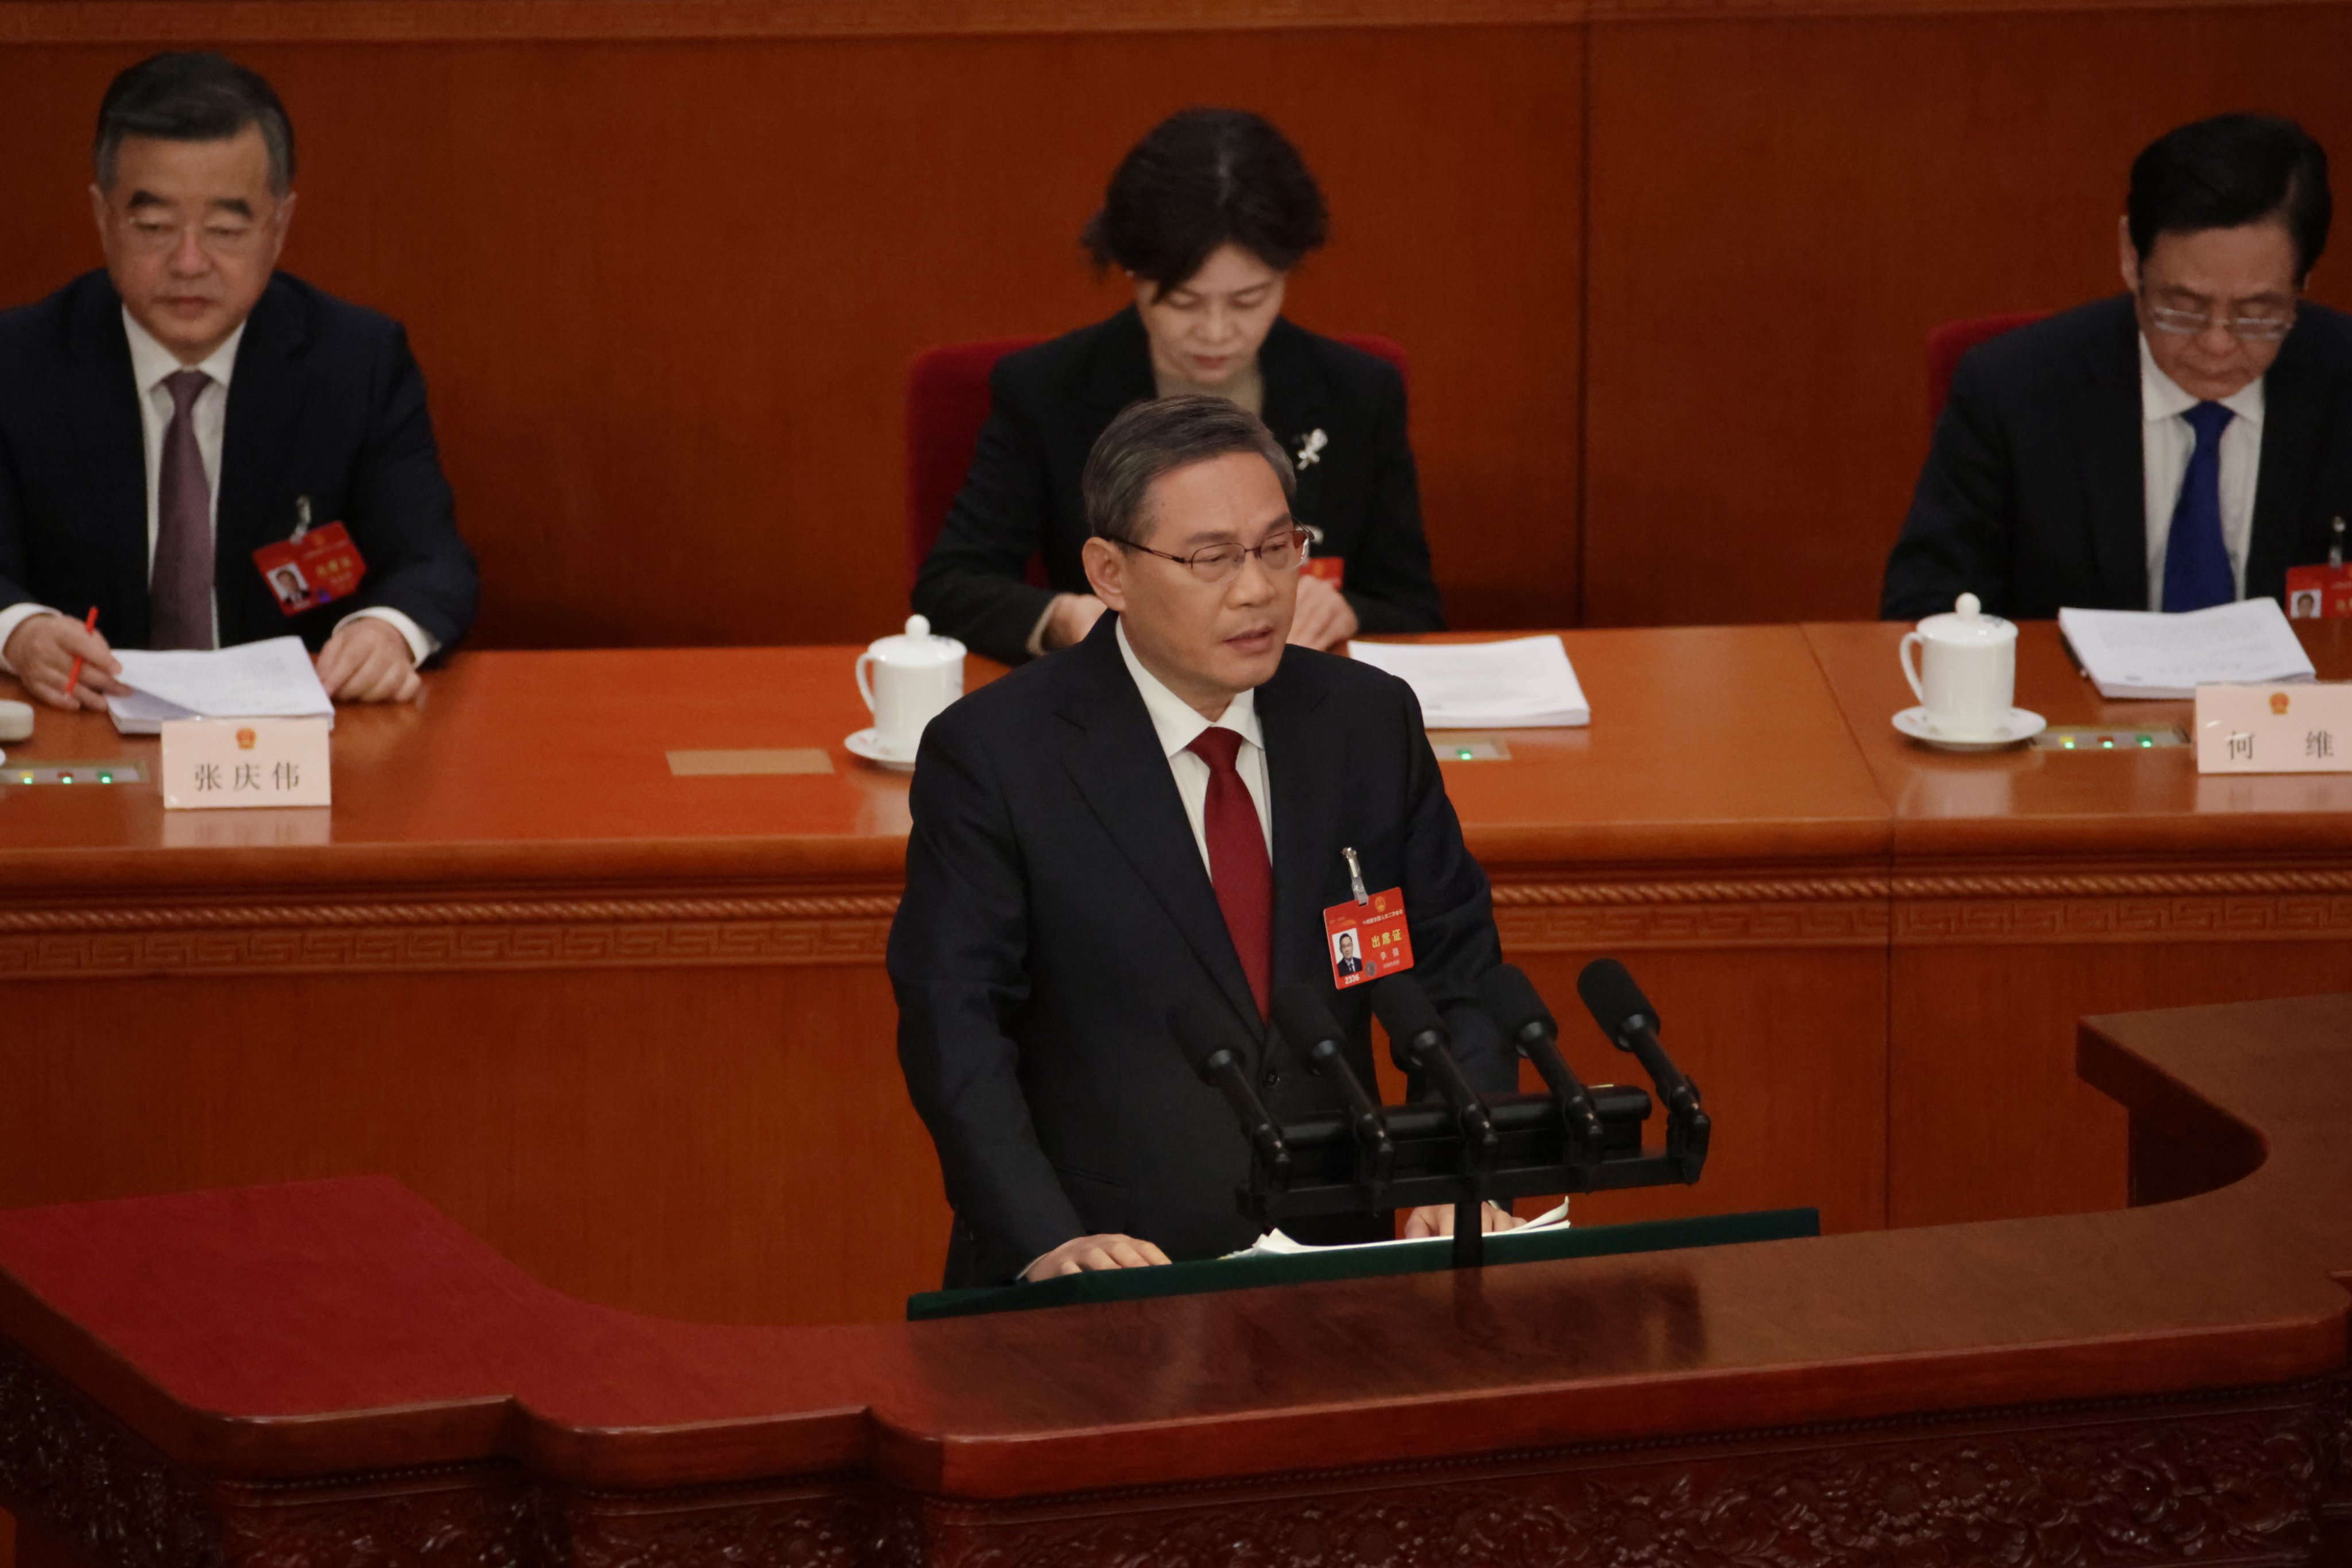 Premier Li Qiang delivers his government work report during the opening ceremony of the second session of the 14th National People’s Congress at the Great Hall of the People in Beijing on March 5. Photo: EPA-EFE